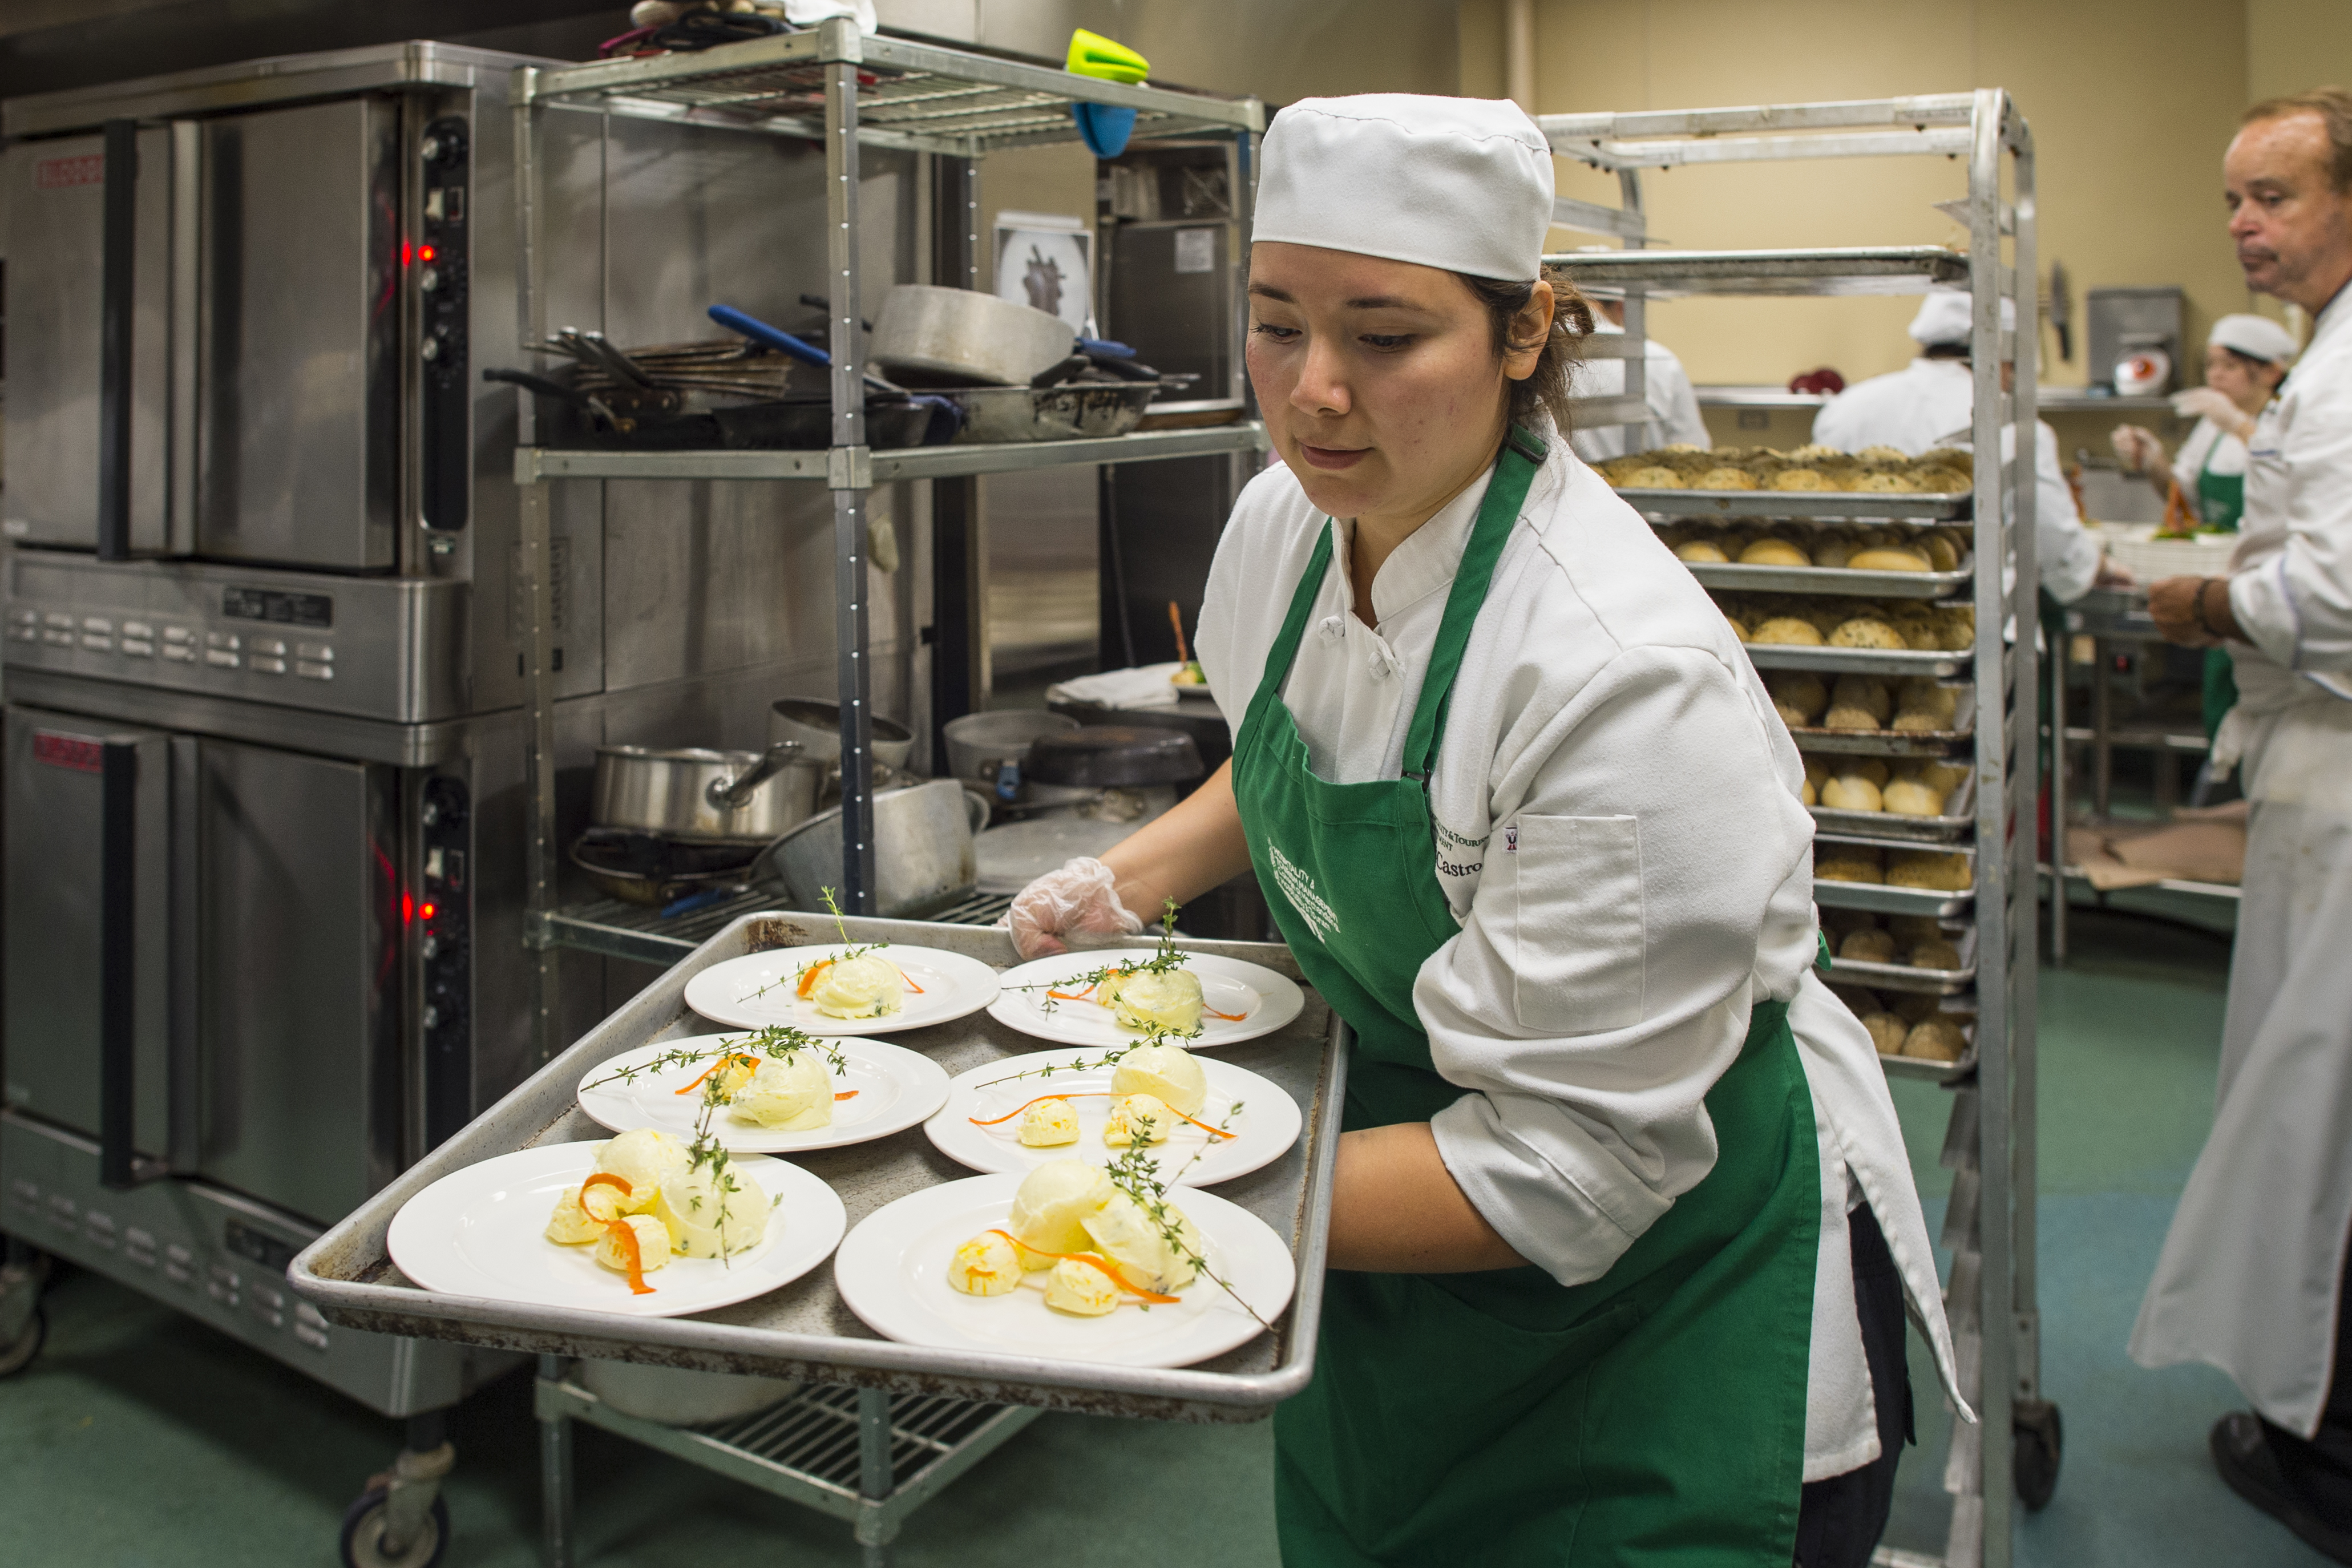 A hospitality student helps prepare a gourmet meal at UNT's Club at Gateway, a student-run restaurant that provides experience in running a successful restaurant.